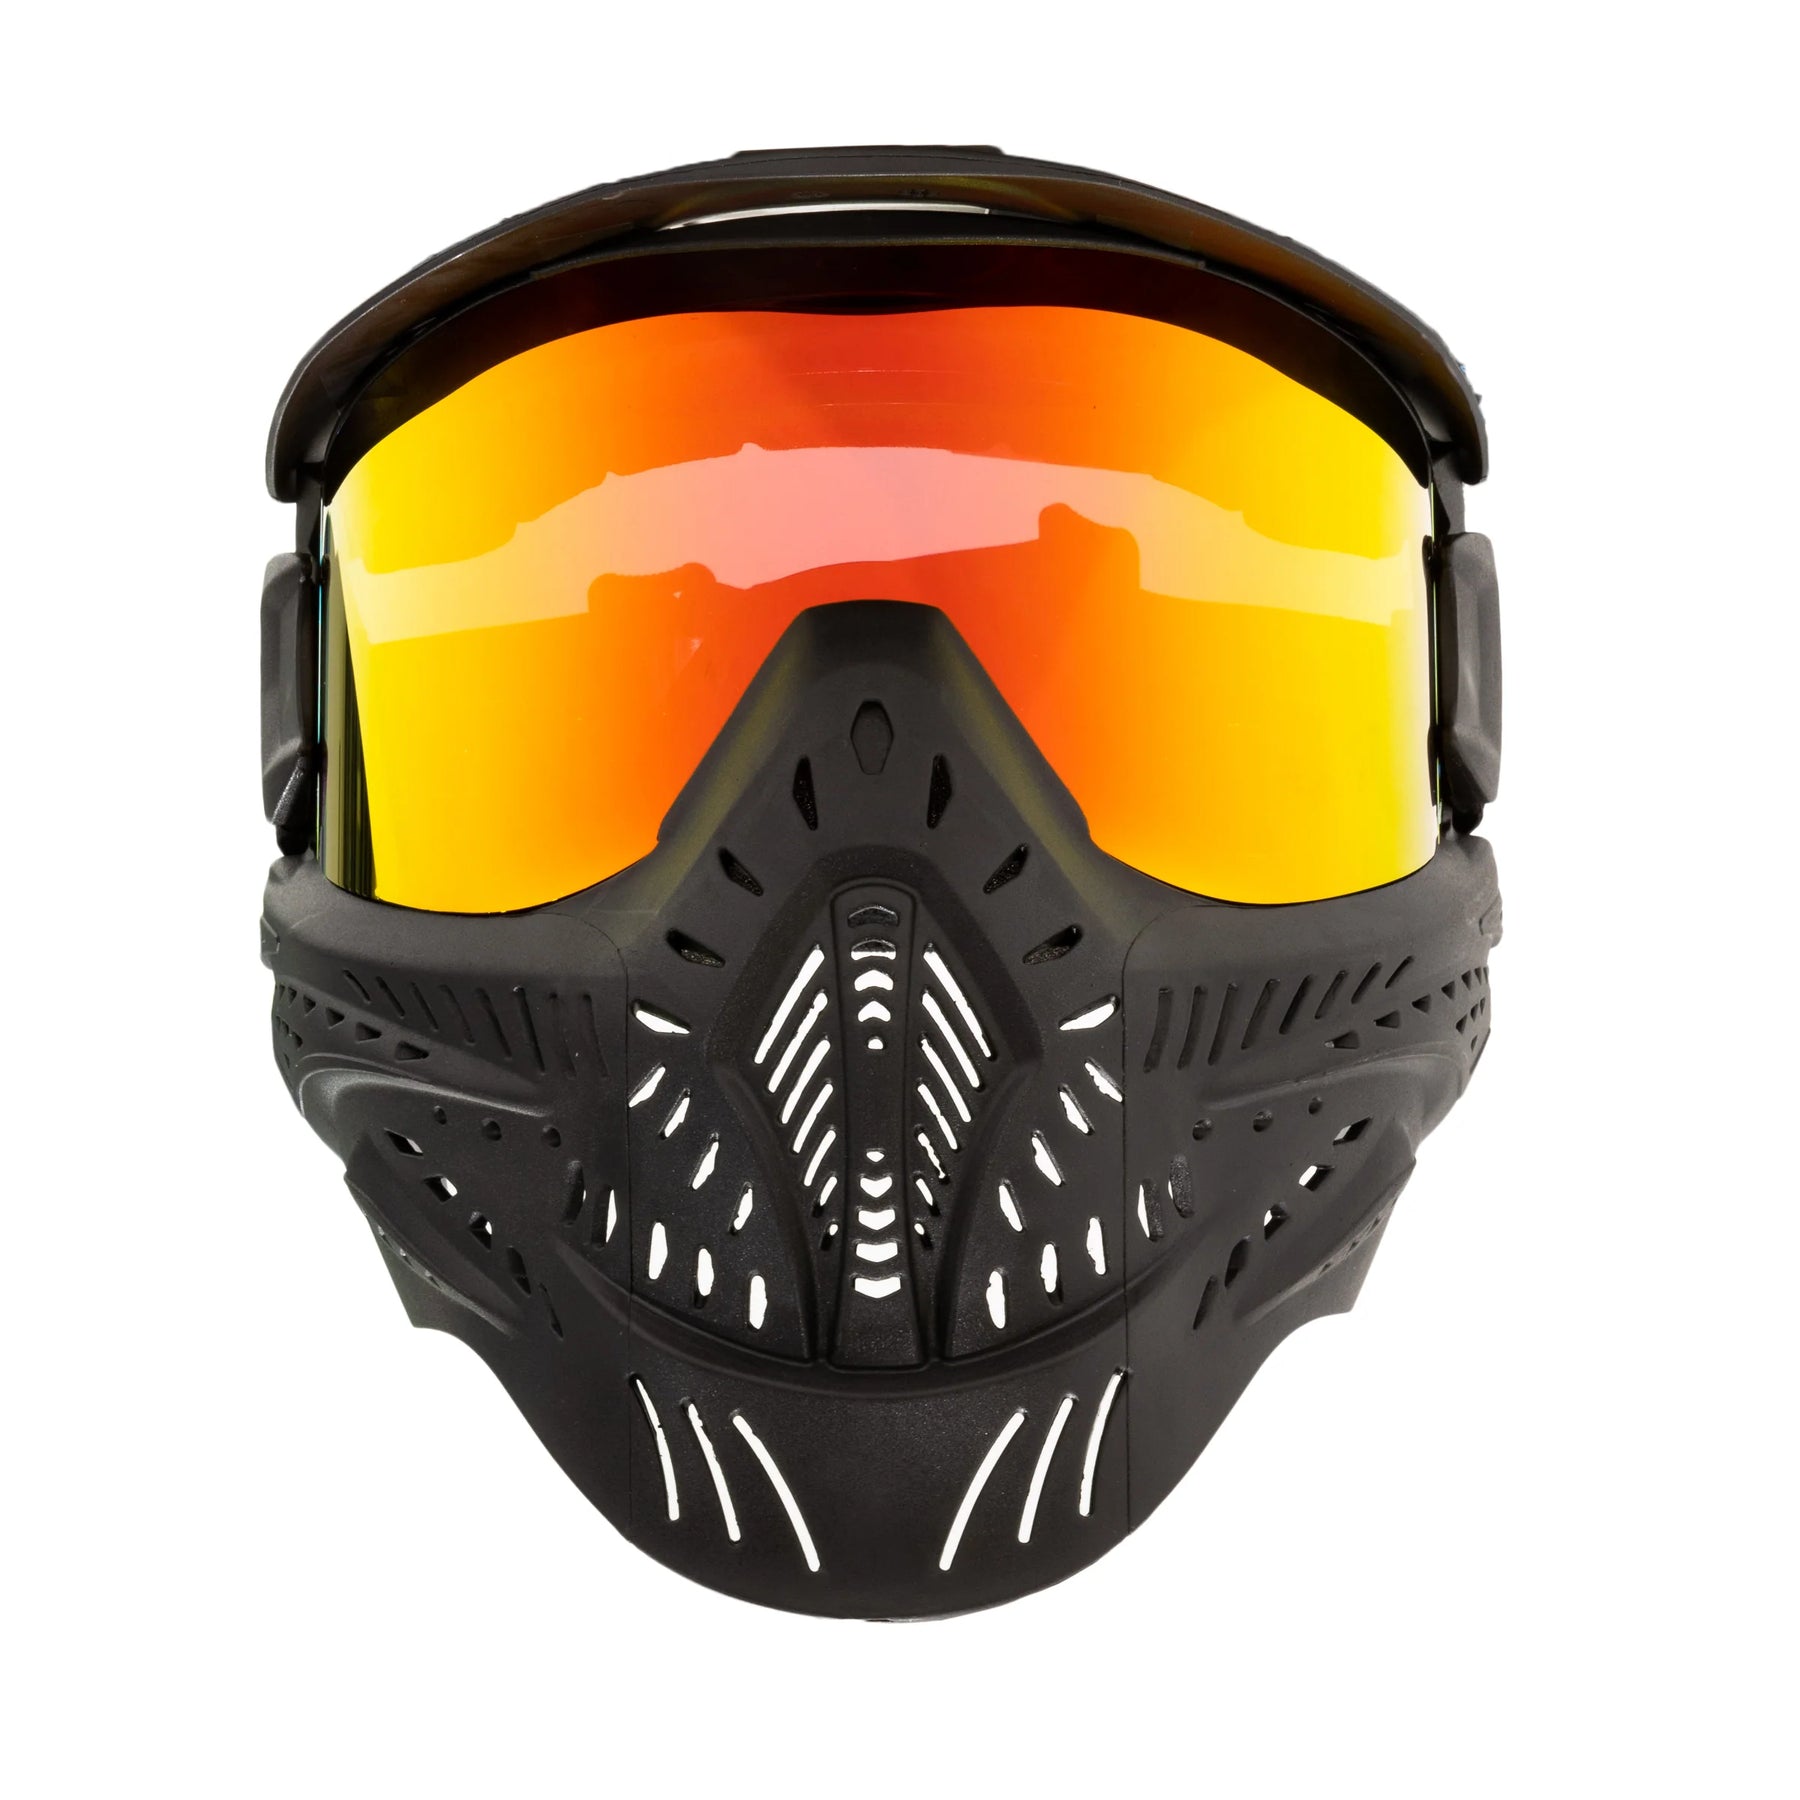 HSTL Goggle | Color: Black W/ Fire Thermal Lens | Paintball & Airsoft Goggle